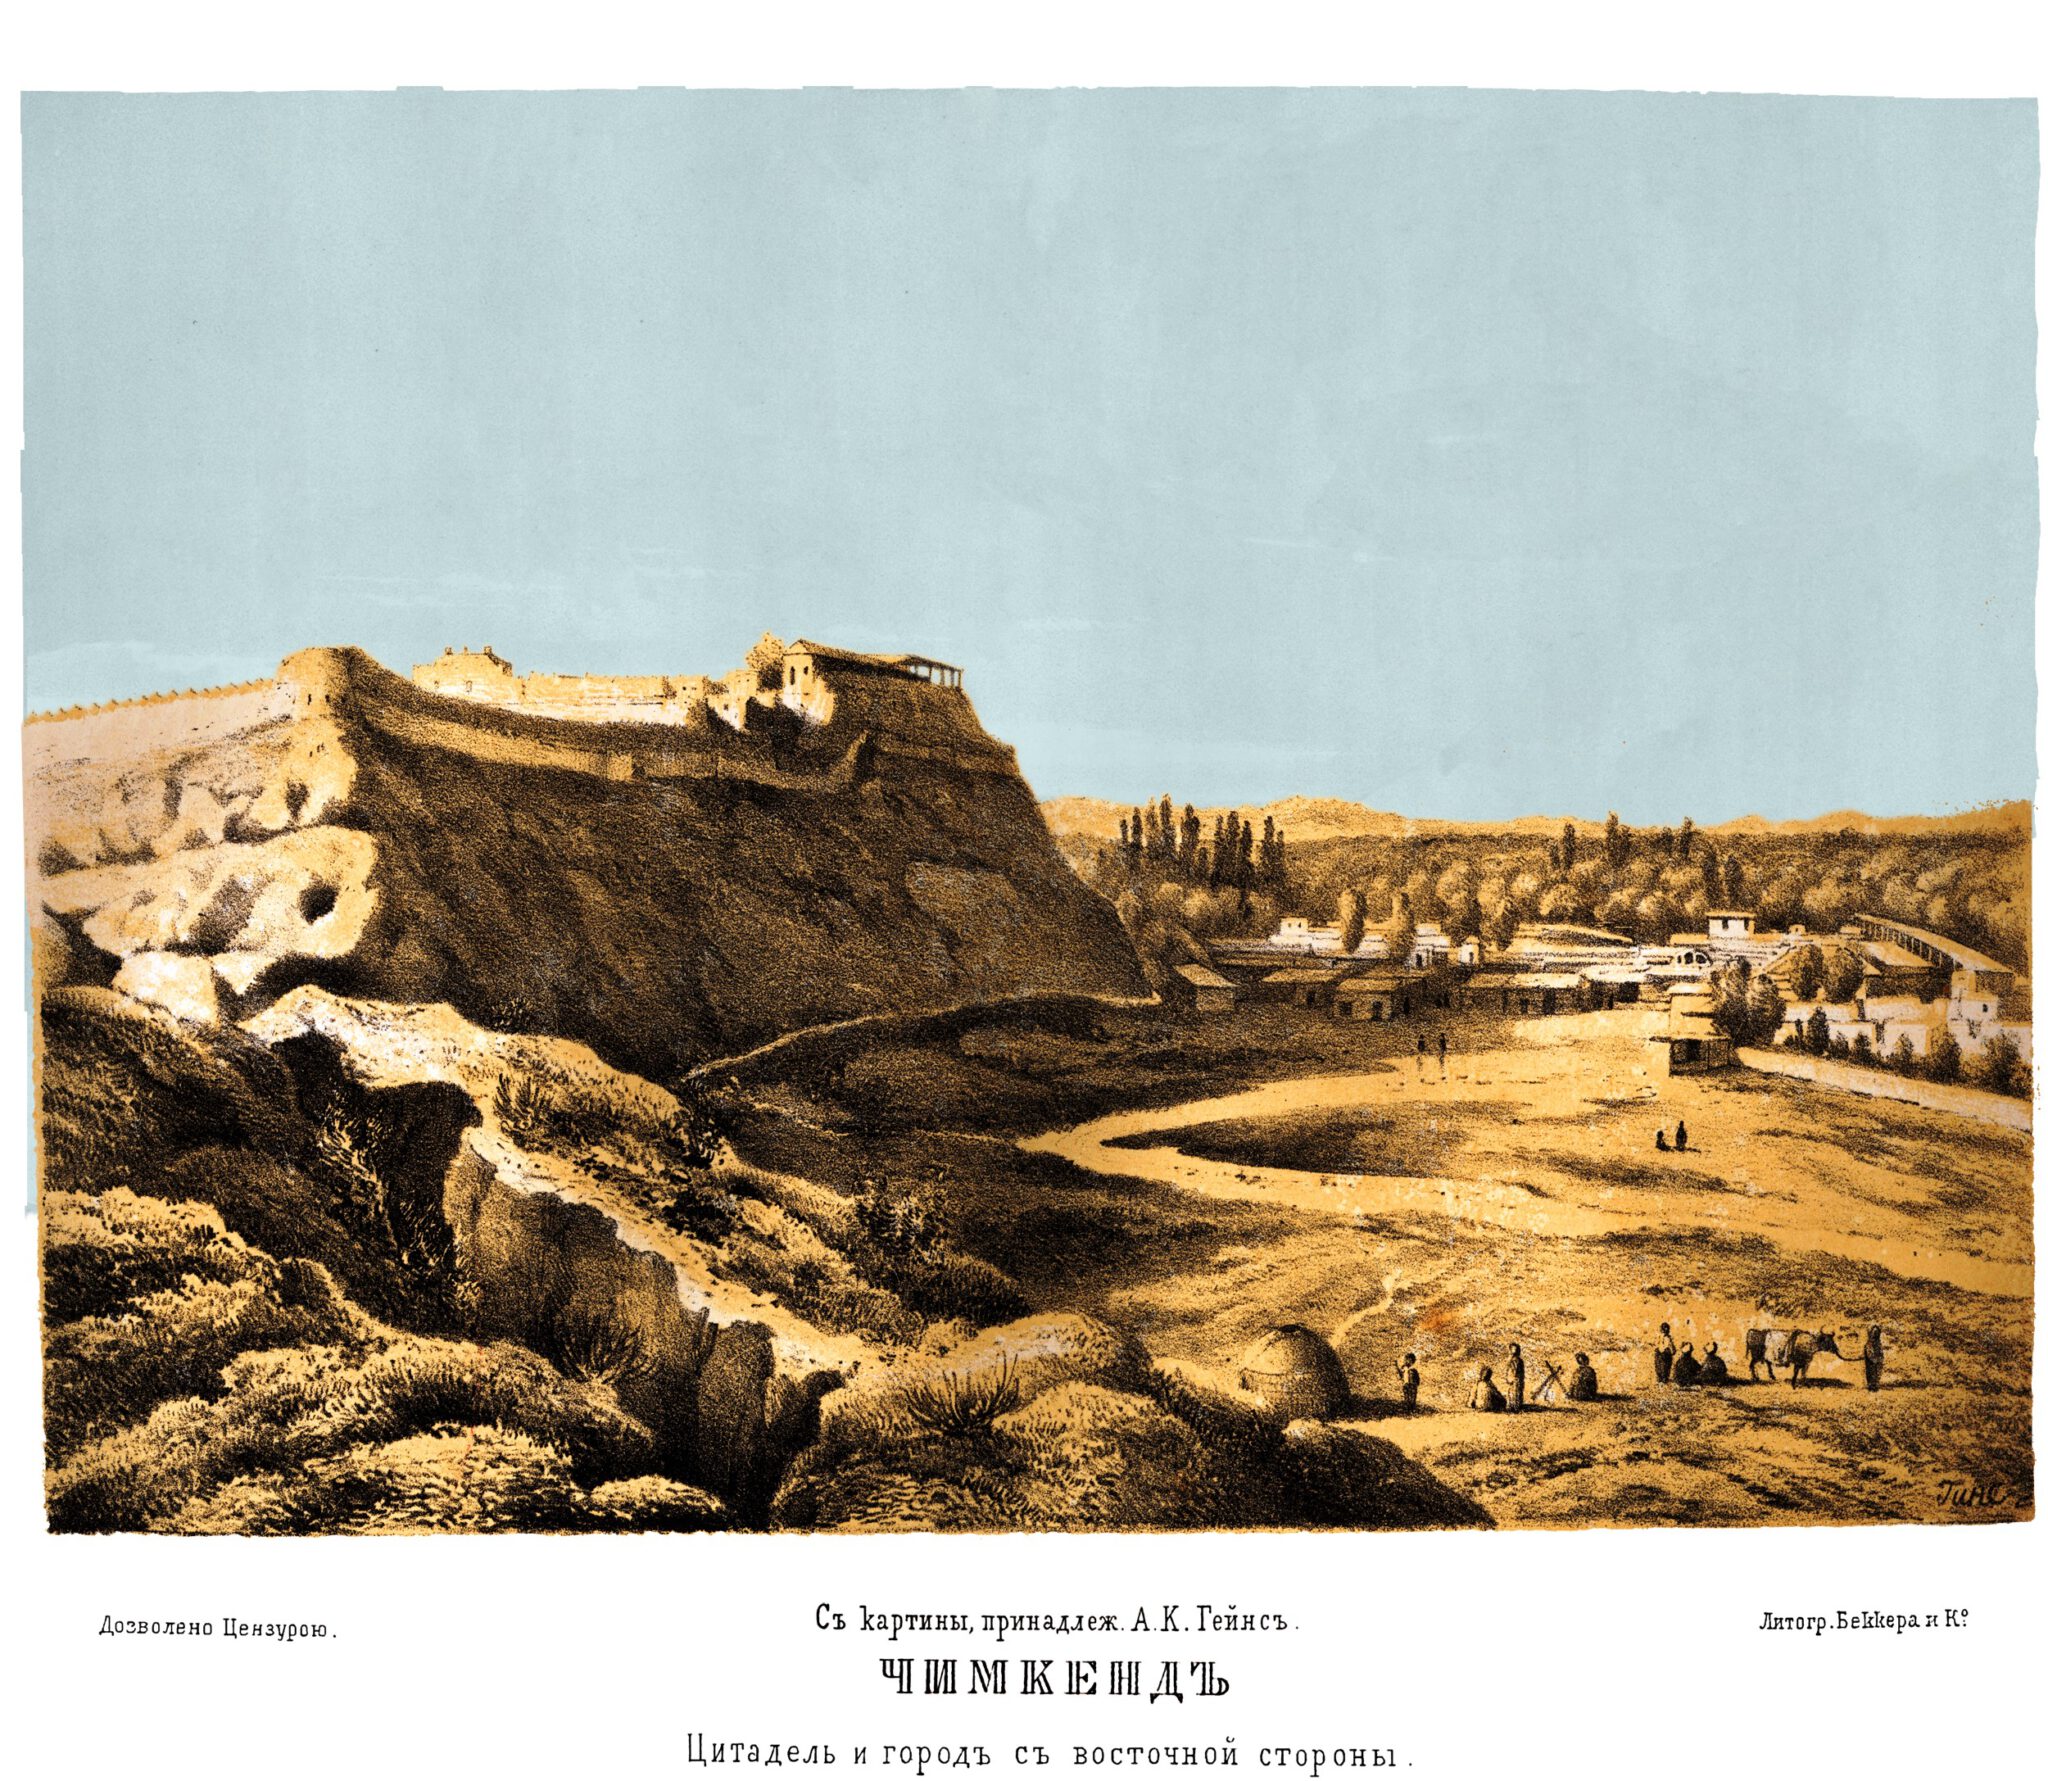 Info Shymkent - Old painting of the historic Citadel of Shymkent in 1866 (Image: A. K. Gaines)